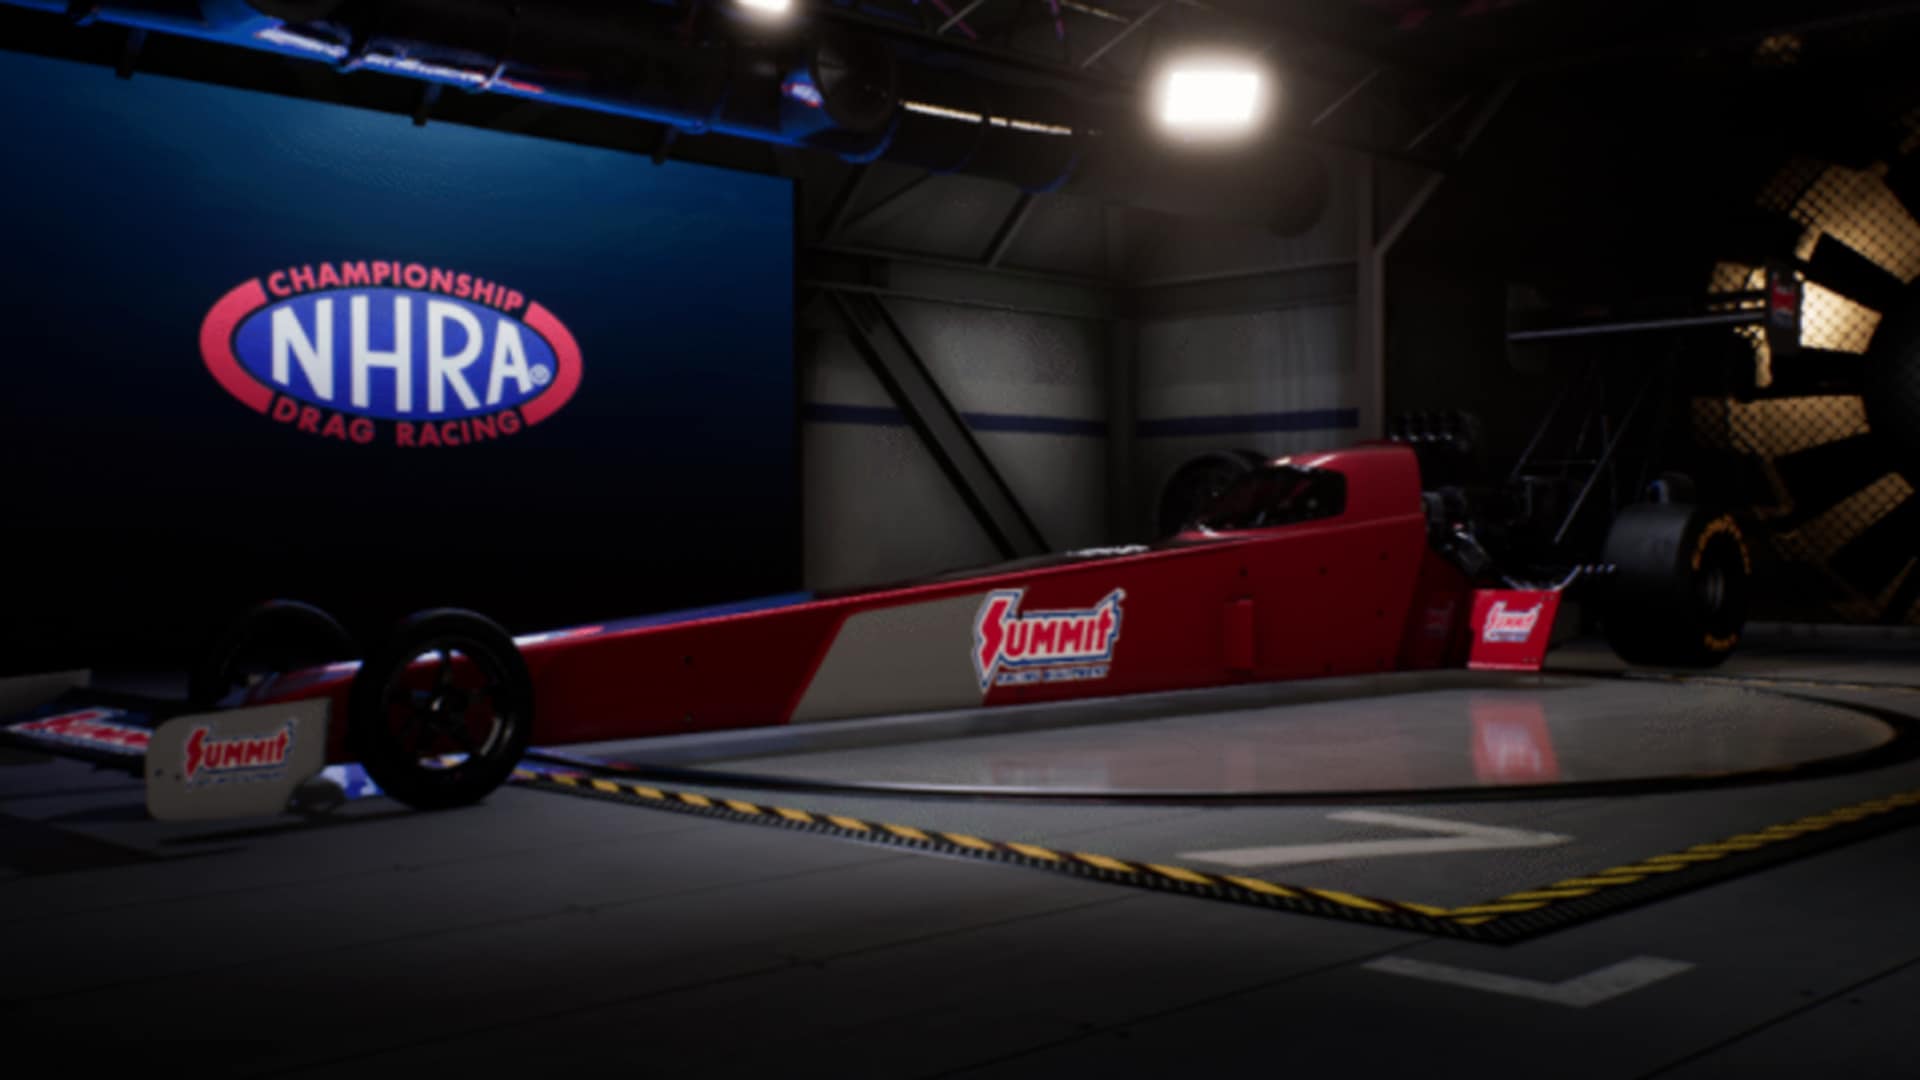 New drag racing NHRA game due later this year